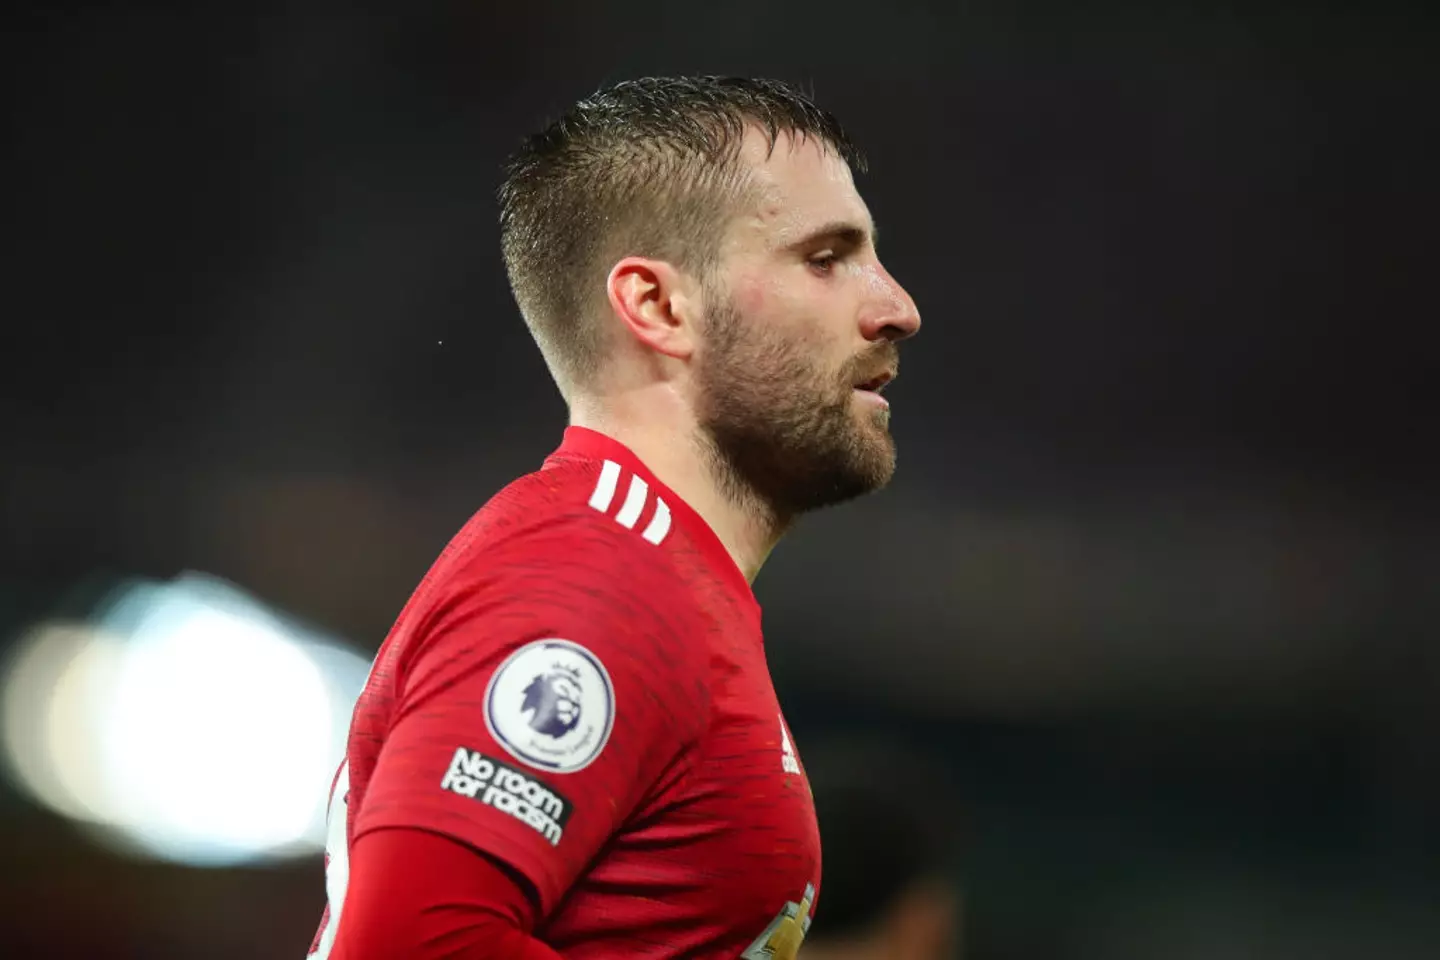 Luke Shaw is one of FPL's most-selected defenders